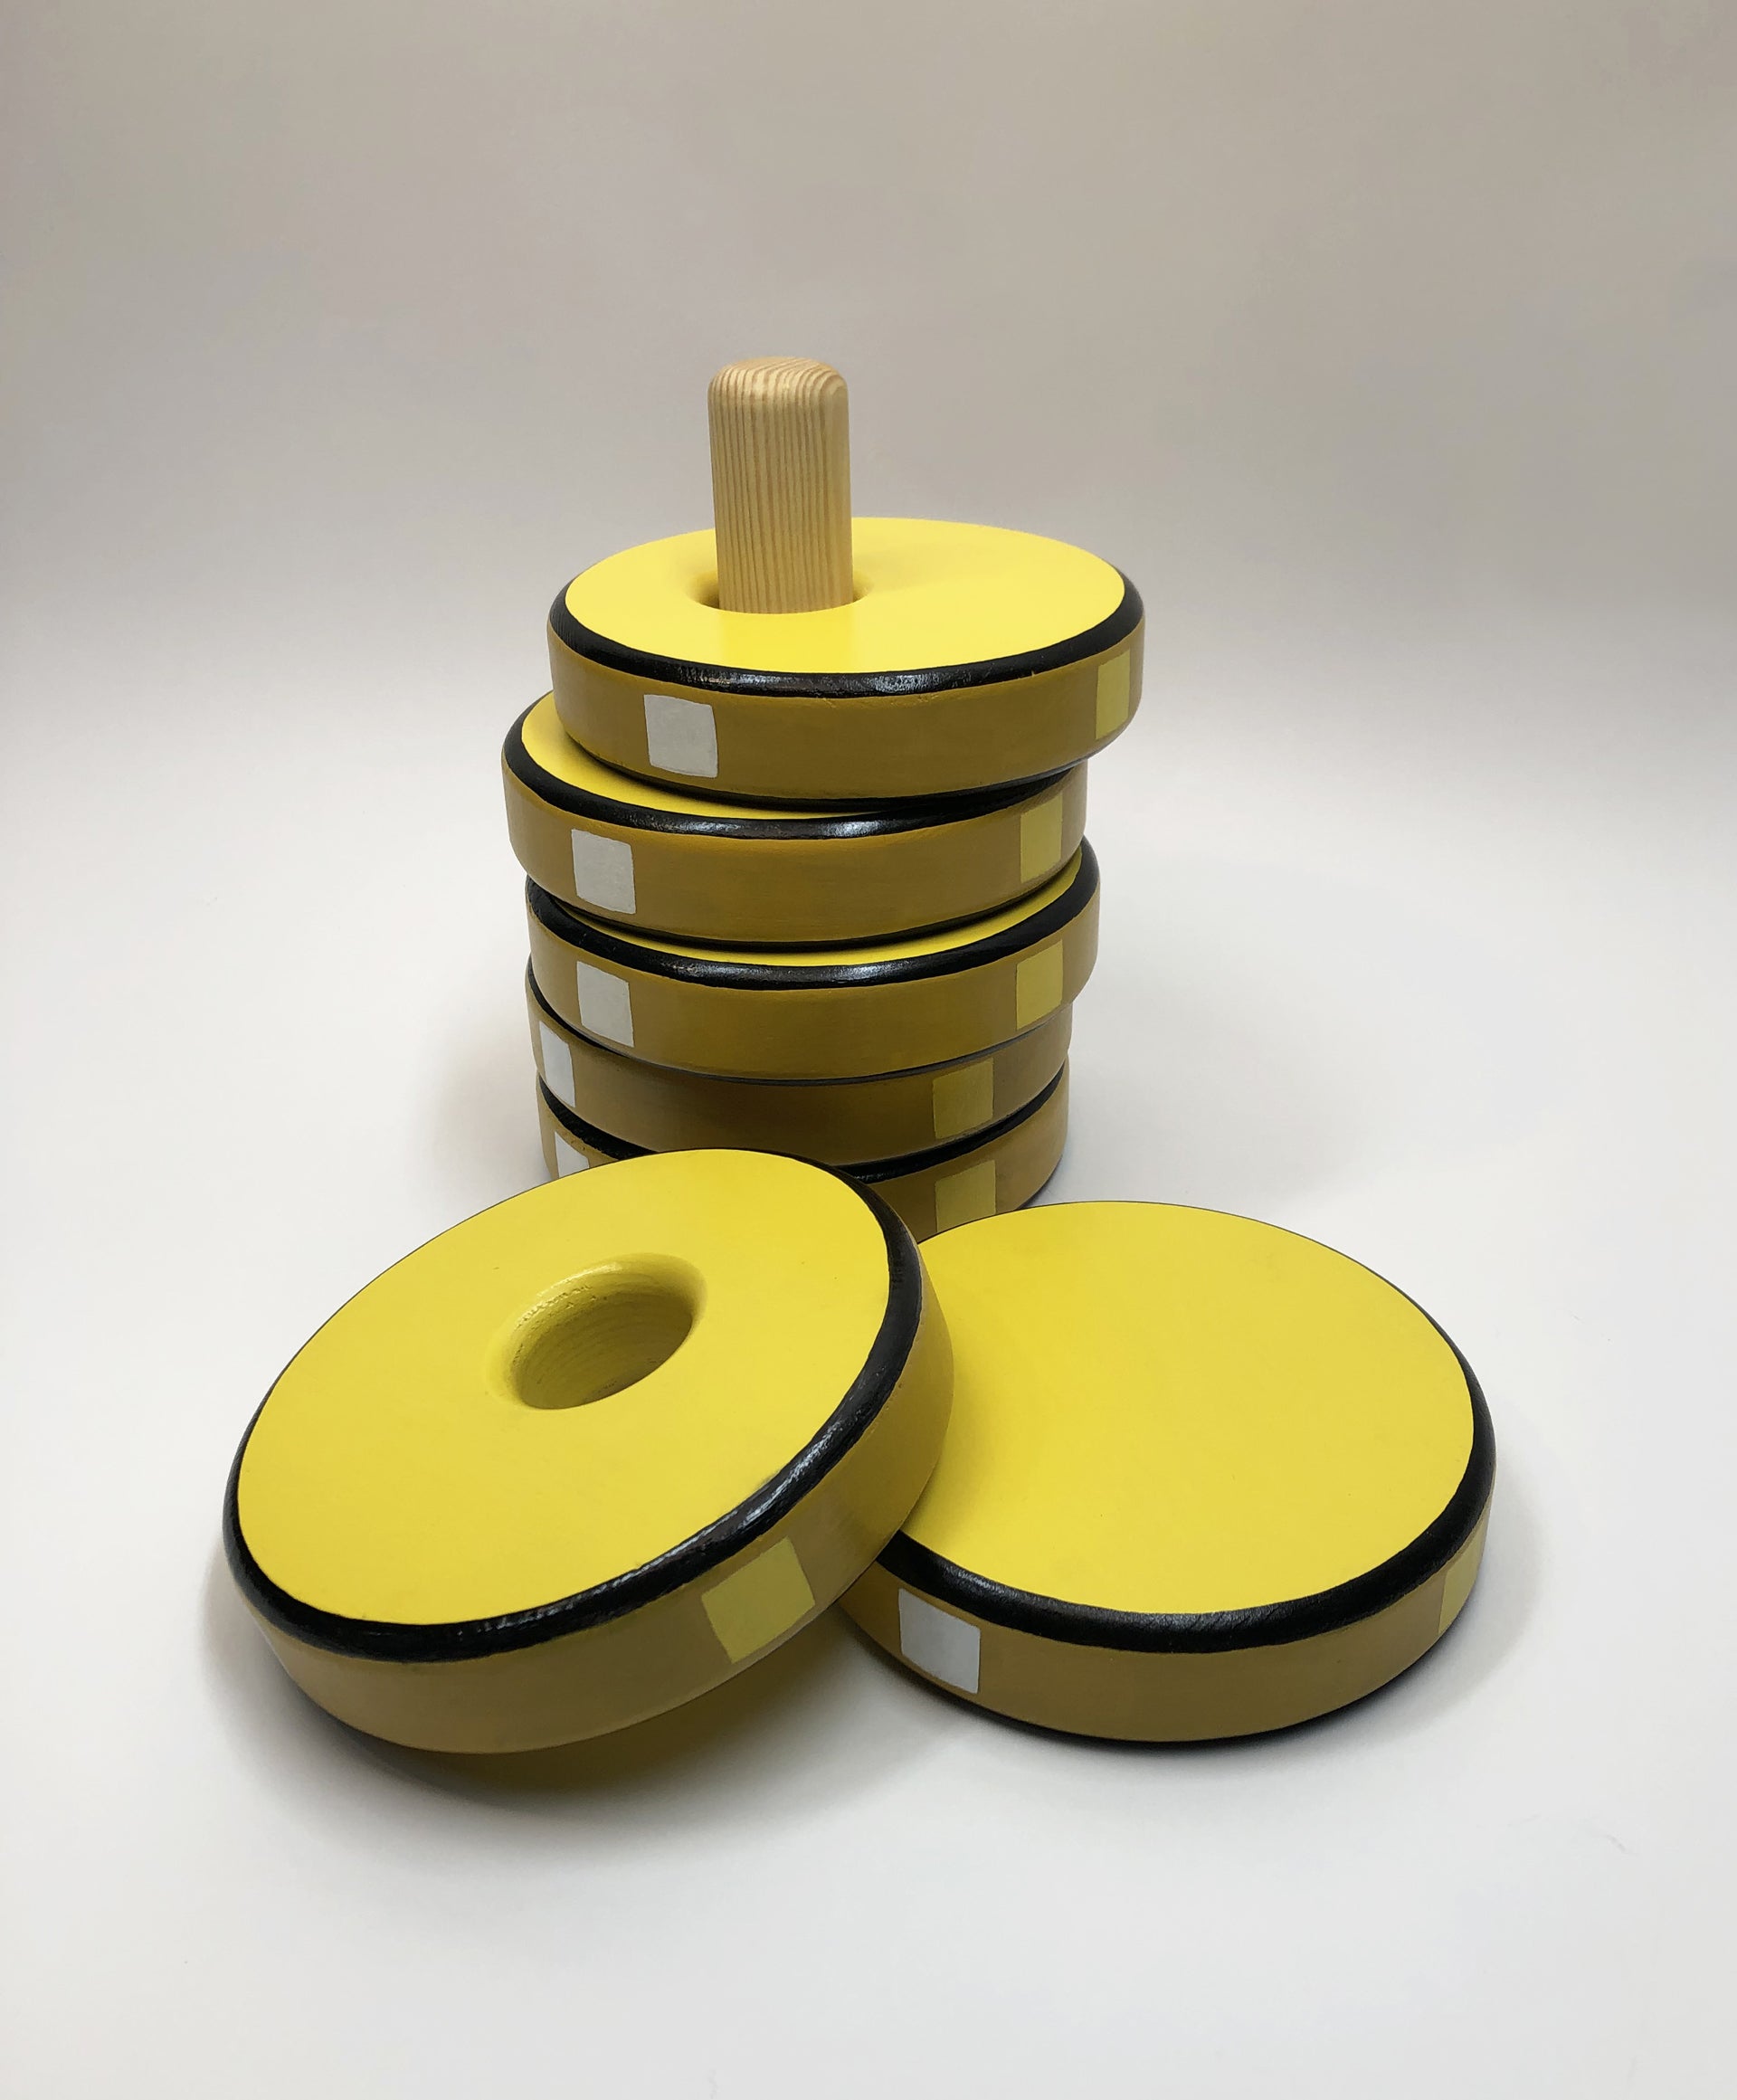 7 Gold Coin Stack ($420)" by E.LEE